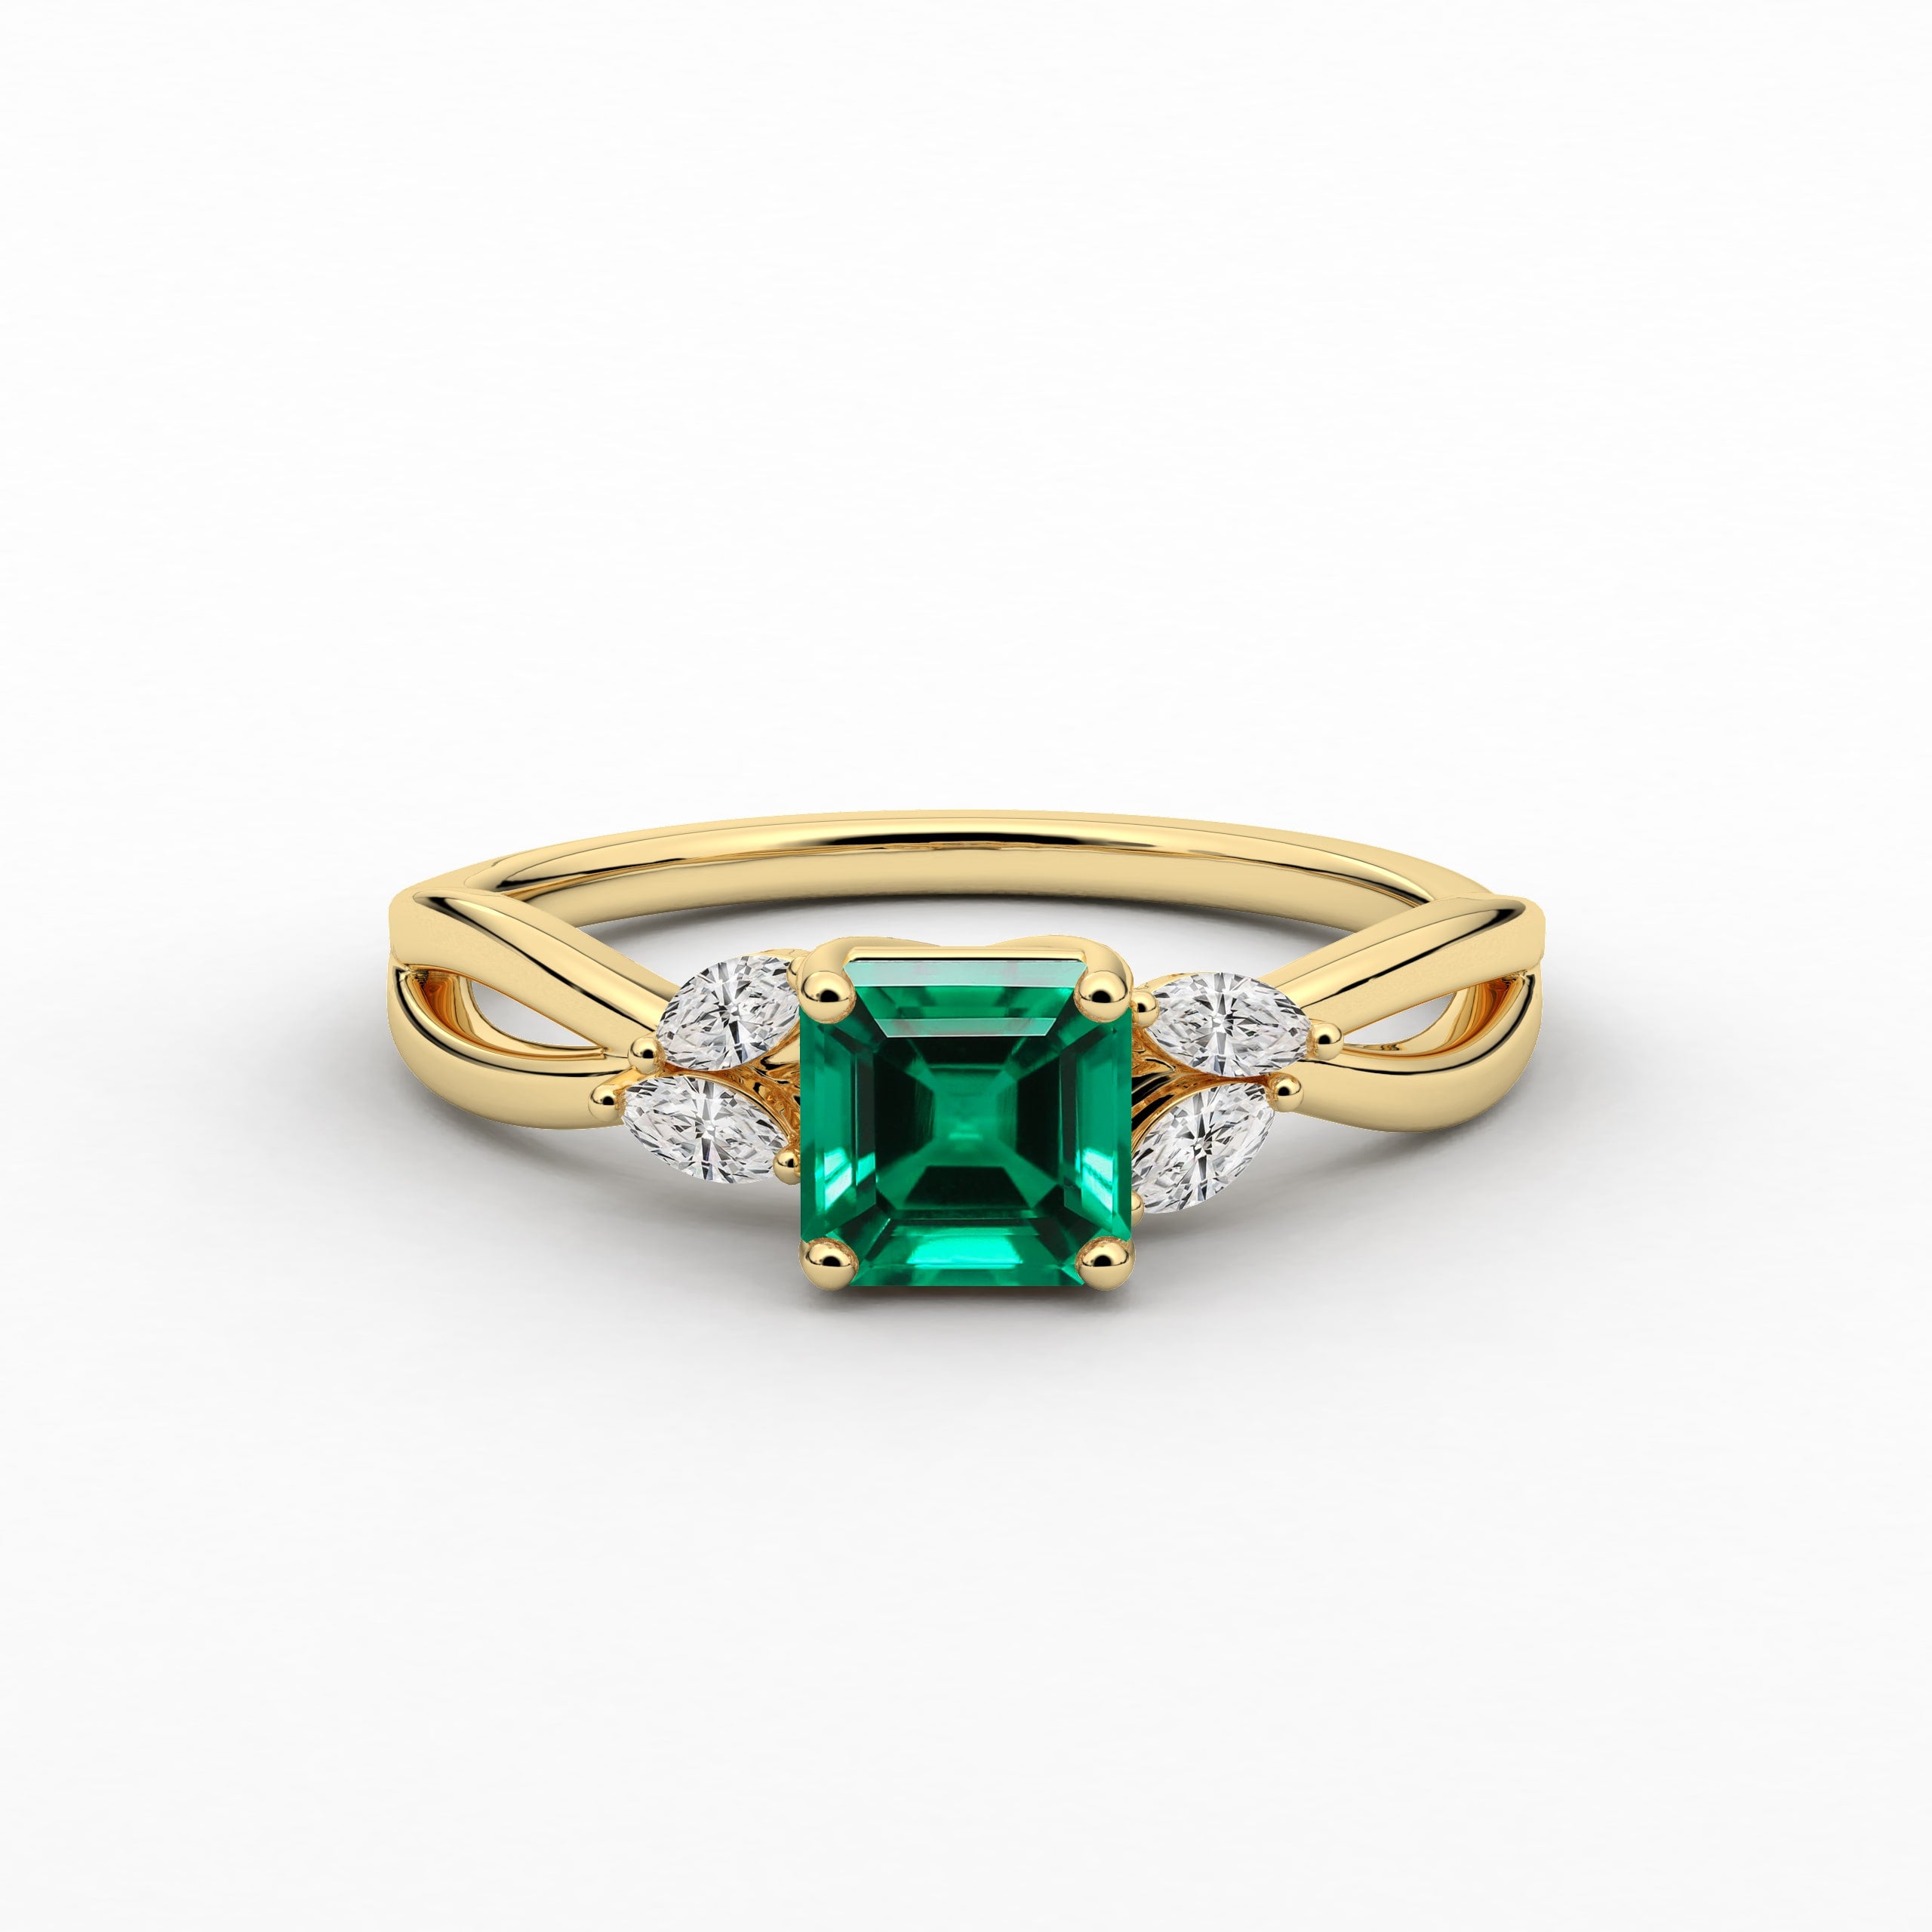 Green Lab Emerald Ring, Unique Nature Inspired Engagement ring in yellow gold 